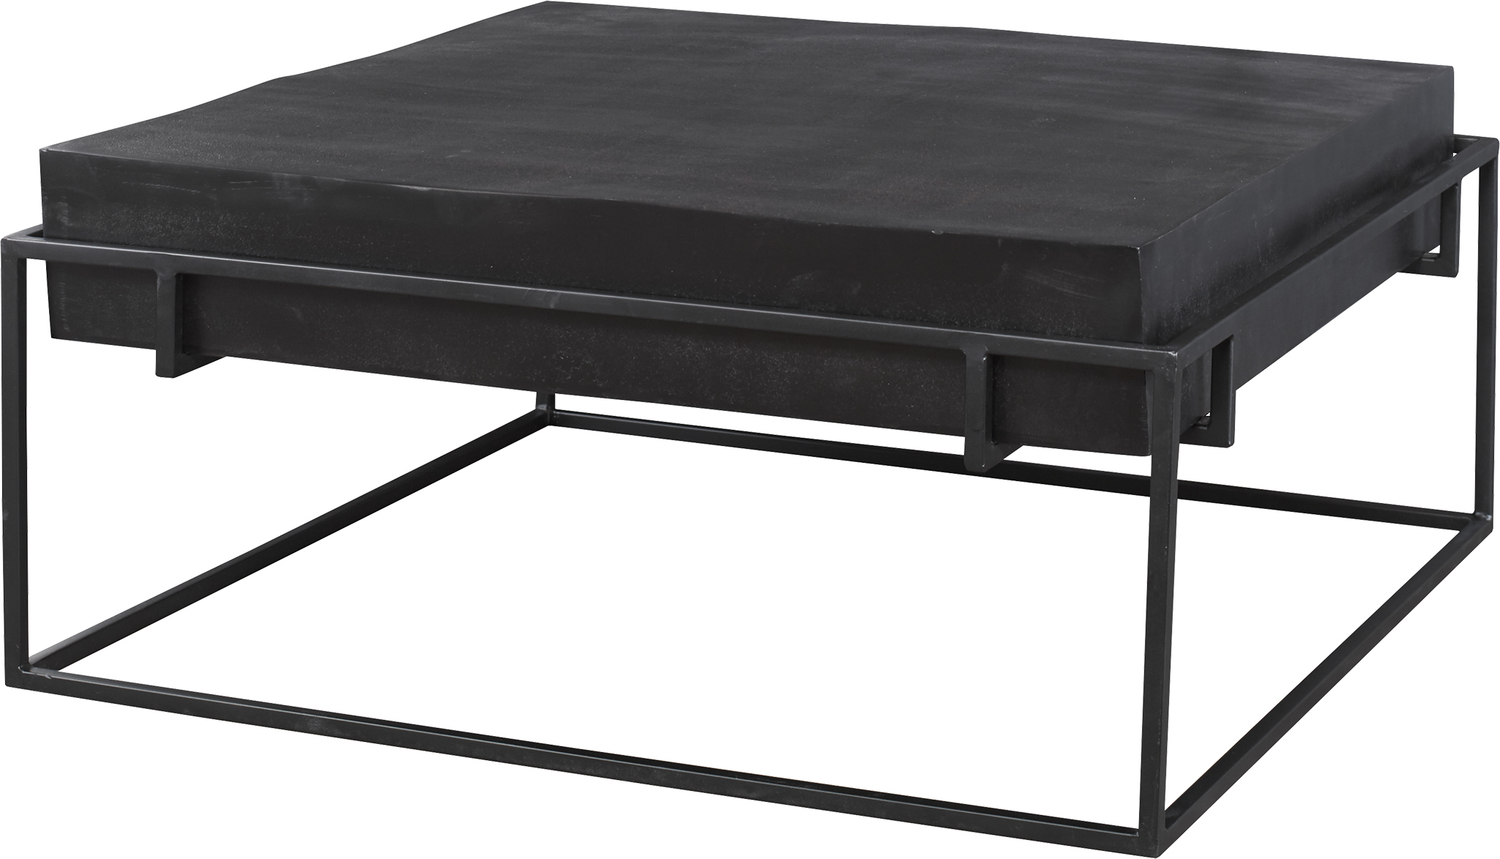 ikea living room coffee table Uttermost Cocktail & Coffee Tables With Modern Minimalist Styling, This Coffee Table Features A Thick Cast Aluminum Top With Natural Texturing Finished In A Dark Oxidized Black, Resting In A Coordinating Aged Black Iron Base.